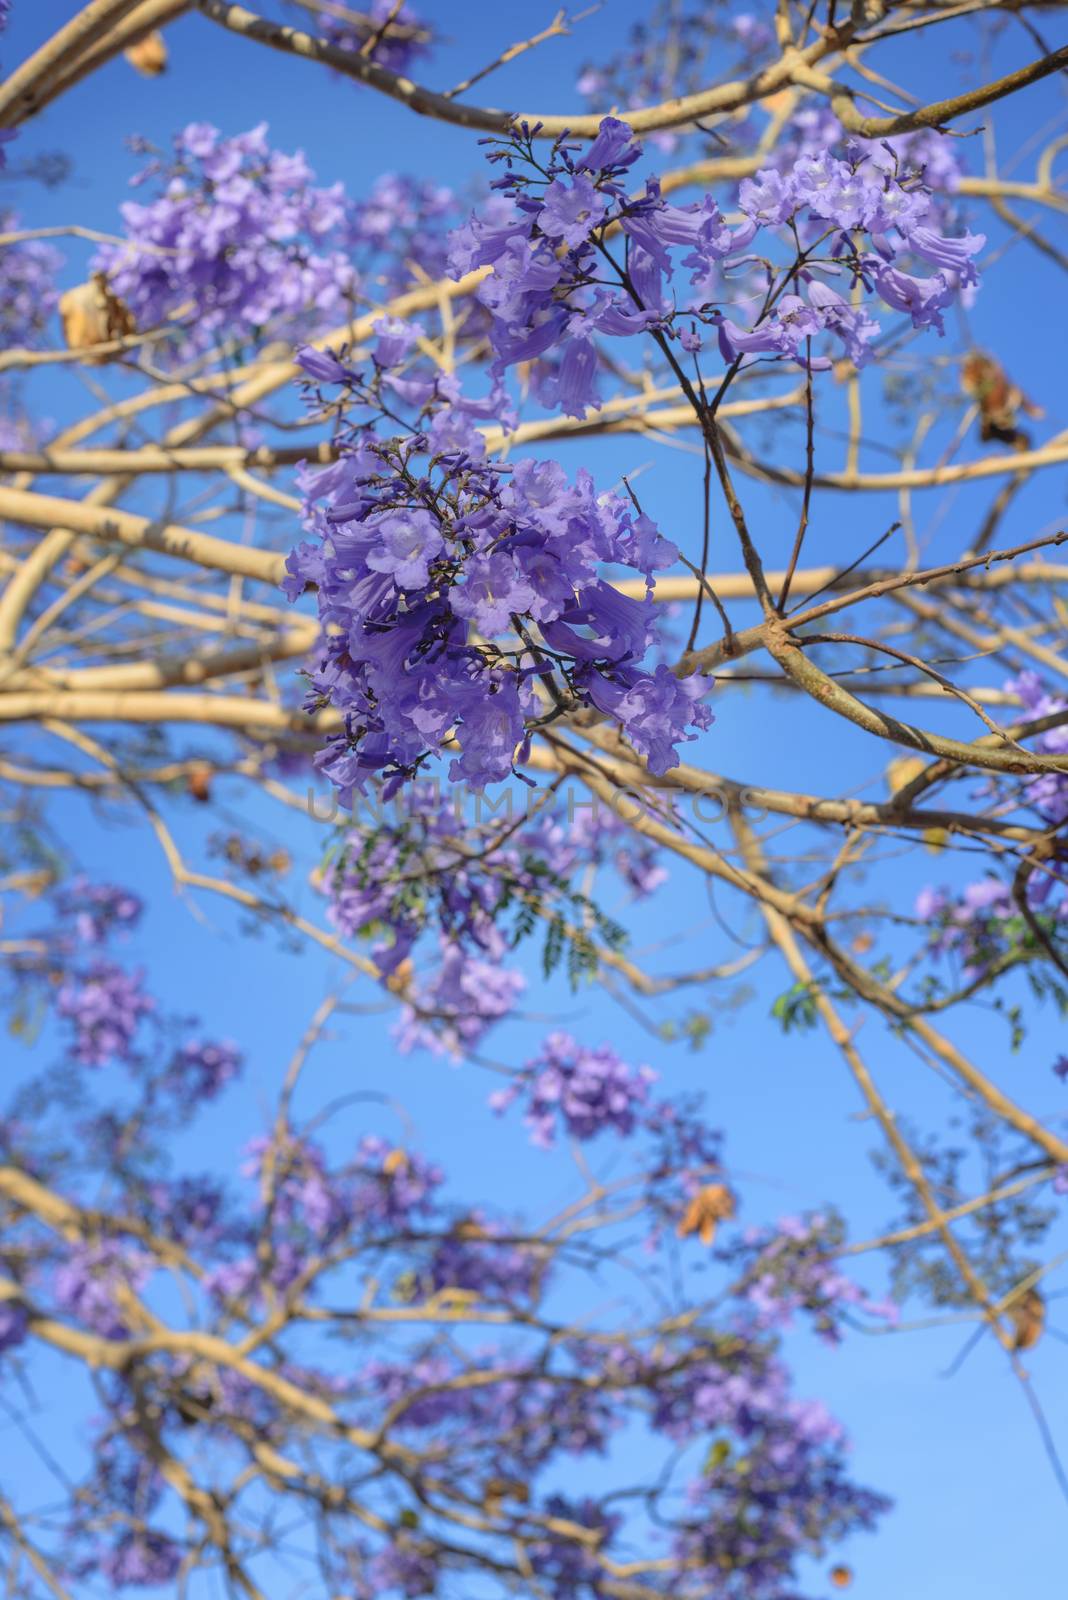 Tree with blooming violet flowers on it